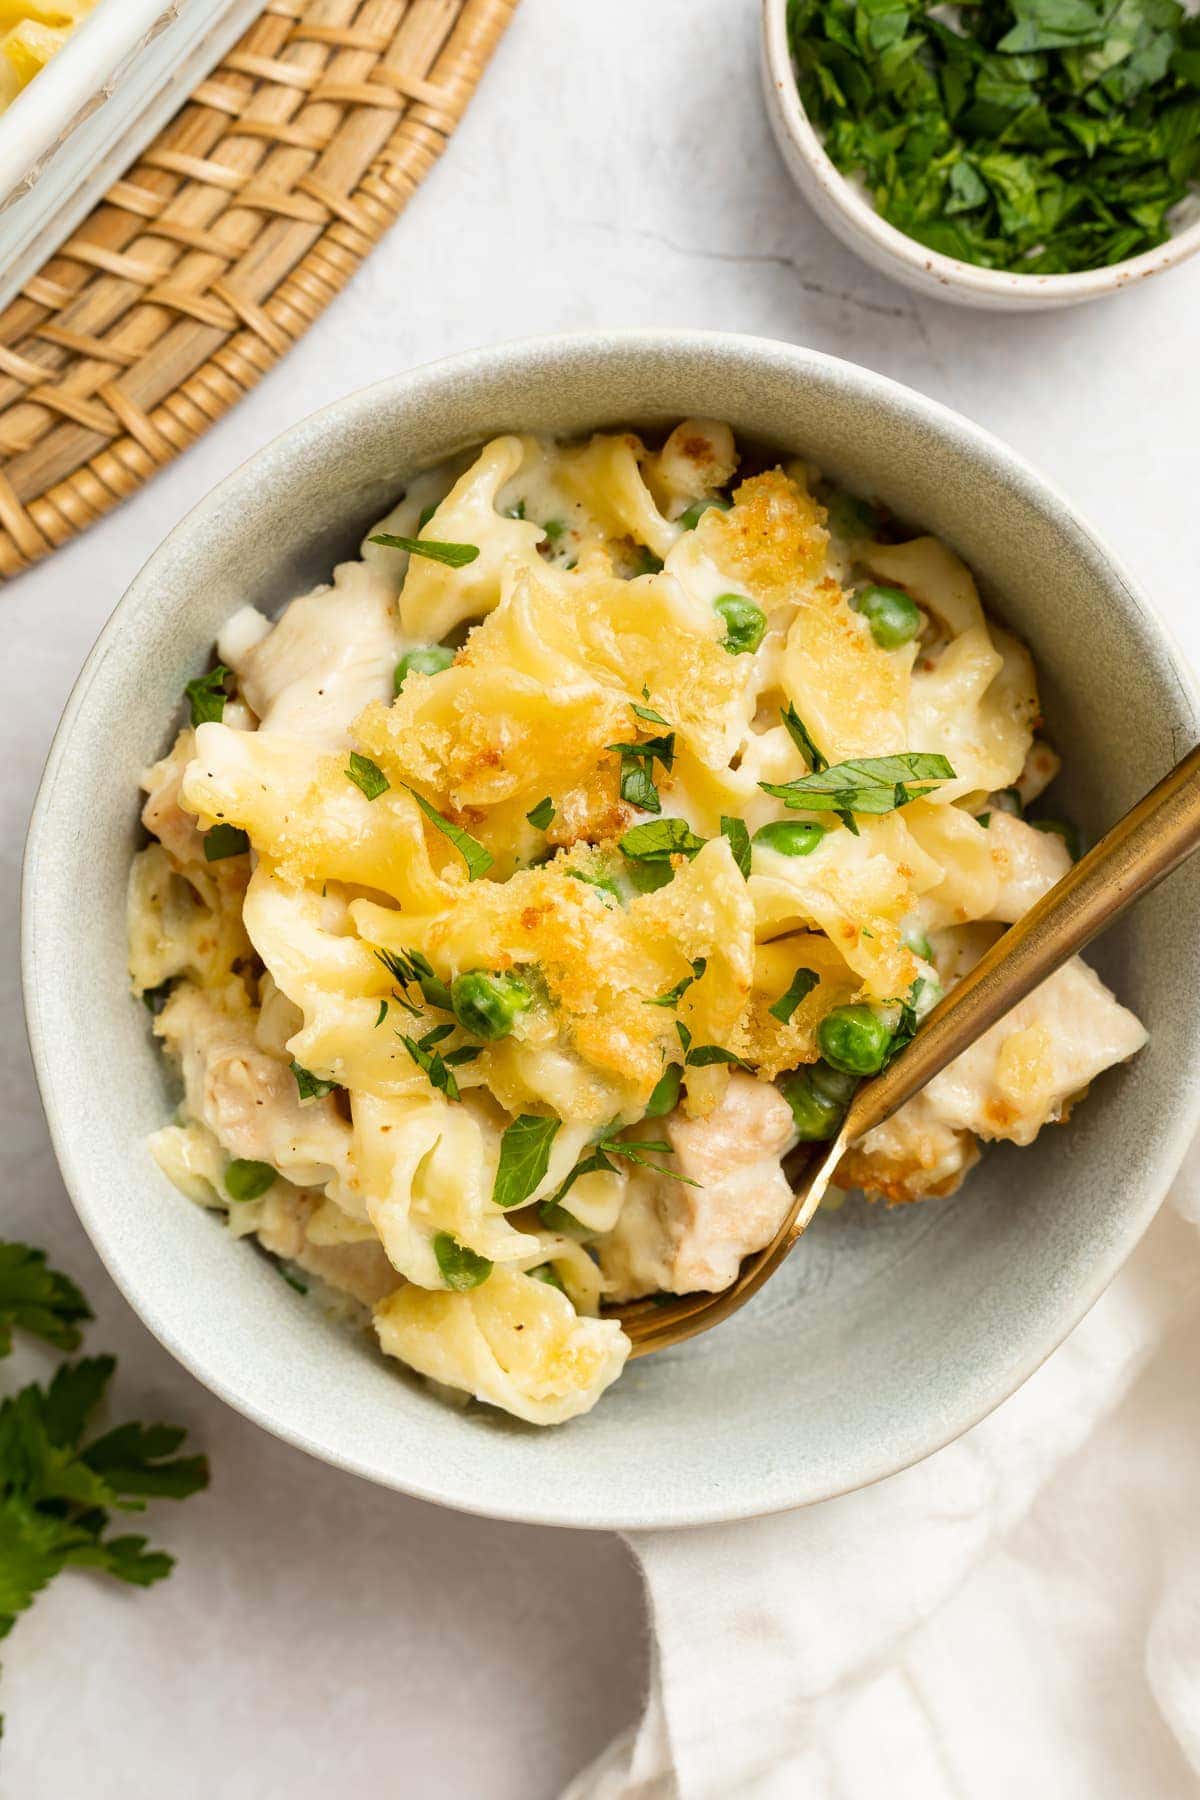 turkey casserole in a bowl with parsley on the side.